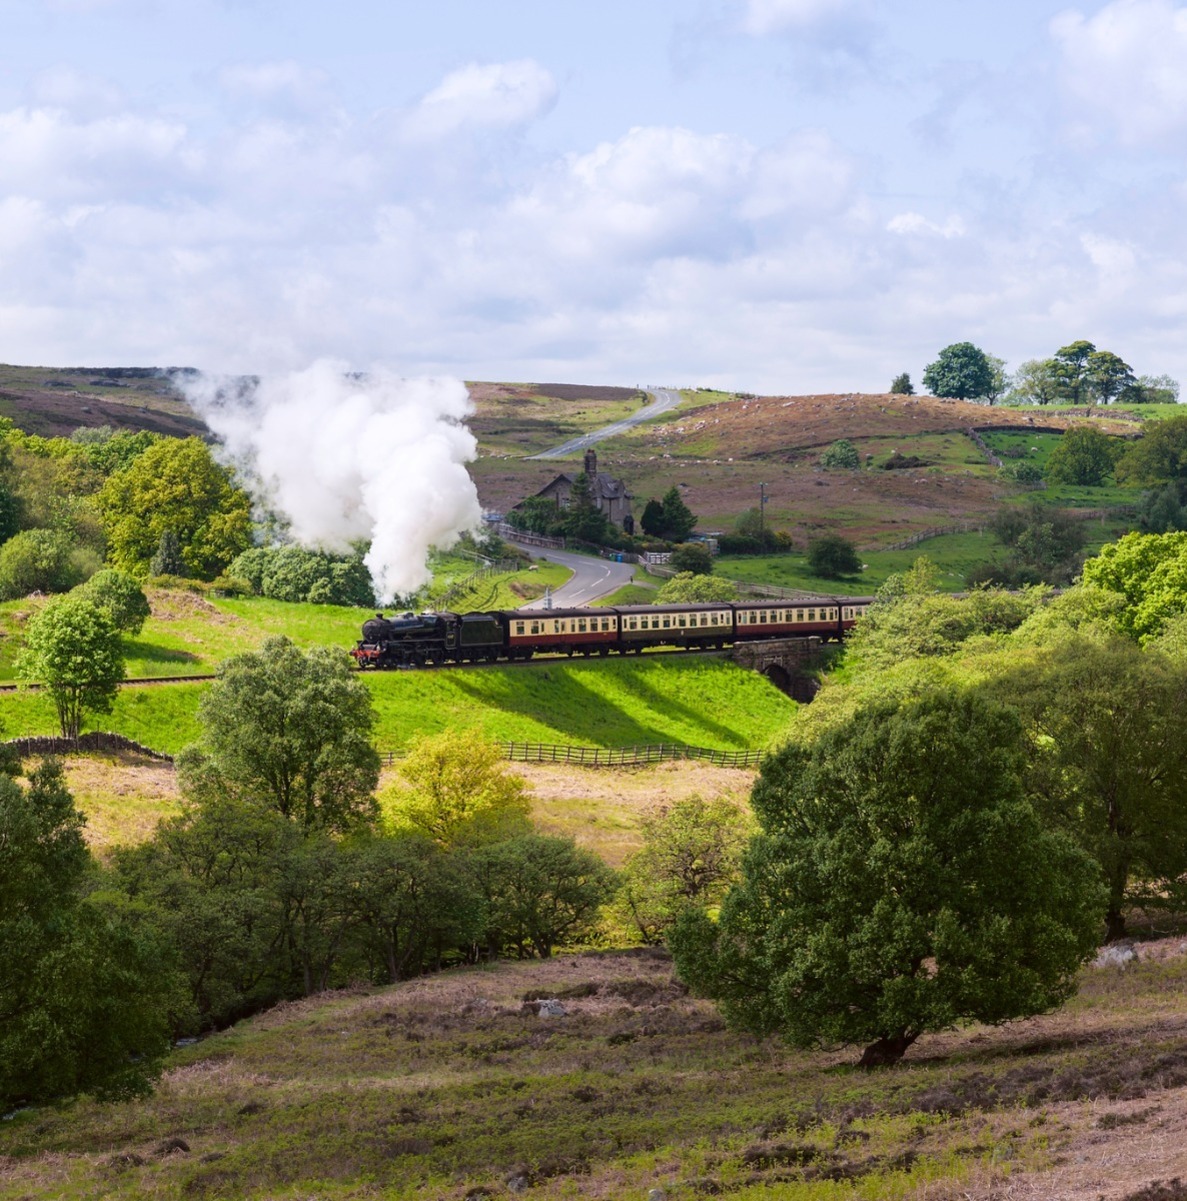 Steam train running on track surrounded by green hills, trees and landscape